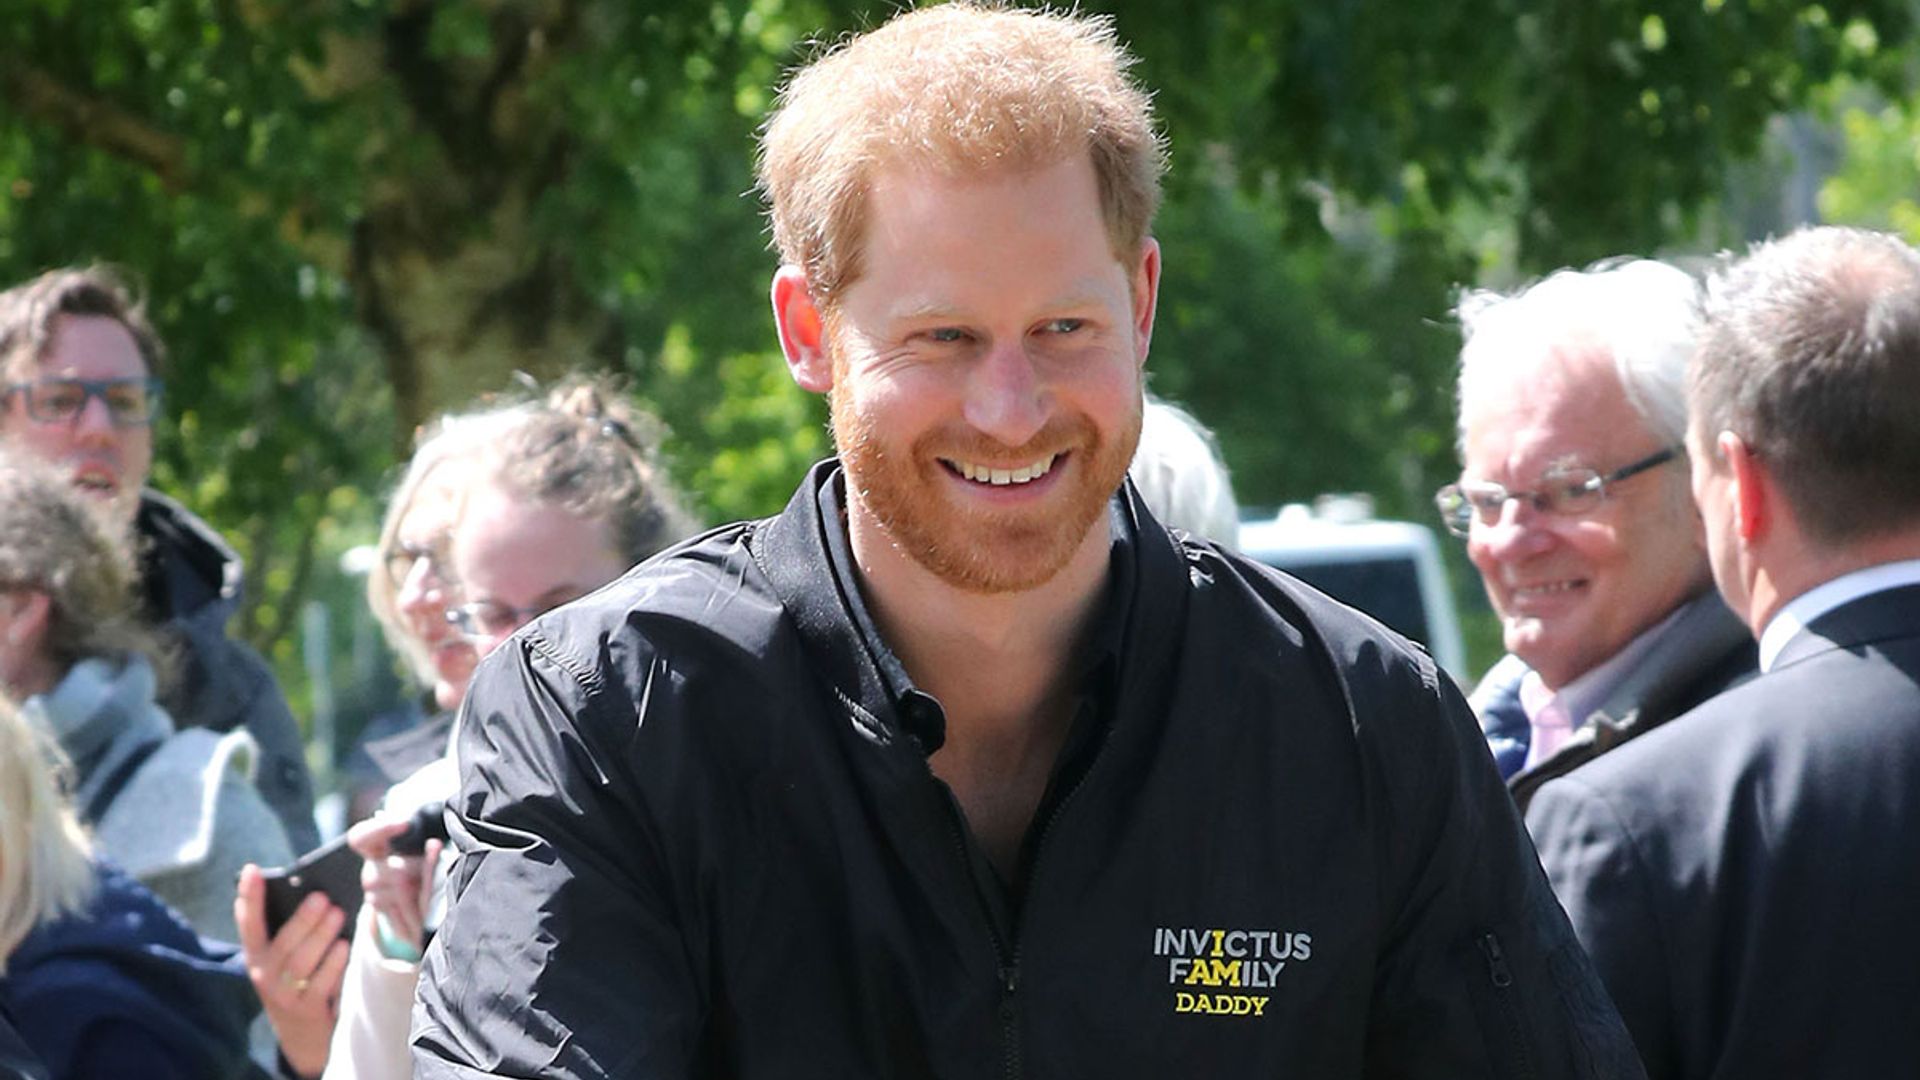 Prince Harry's 'Daddy' jacket is the perfect tribute to baby Archie Harrison